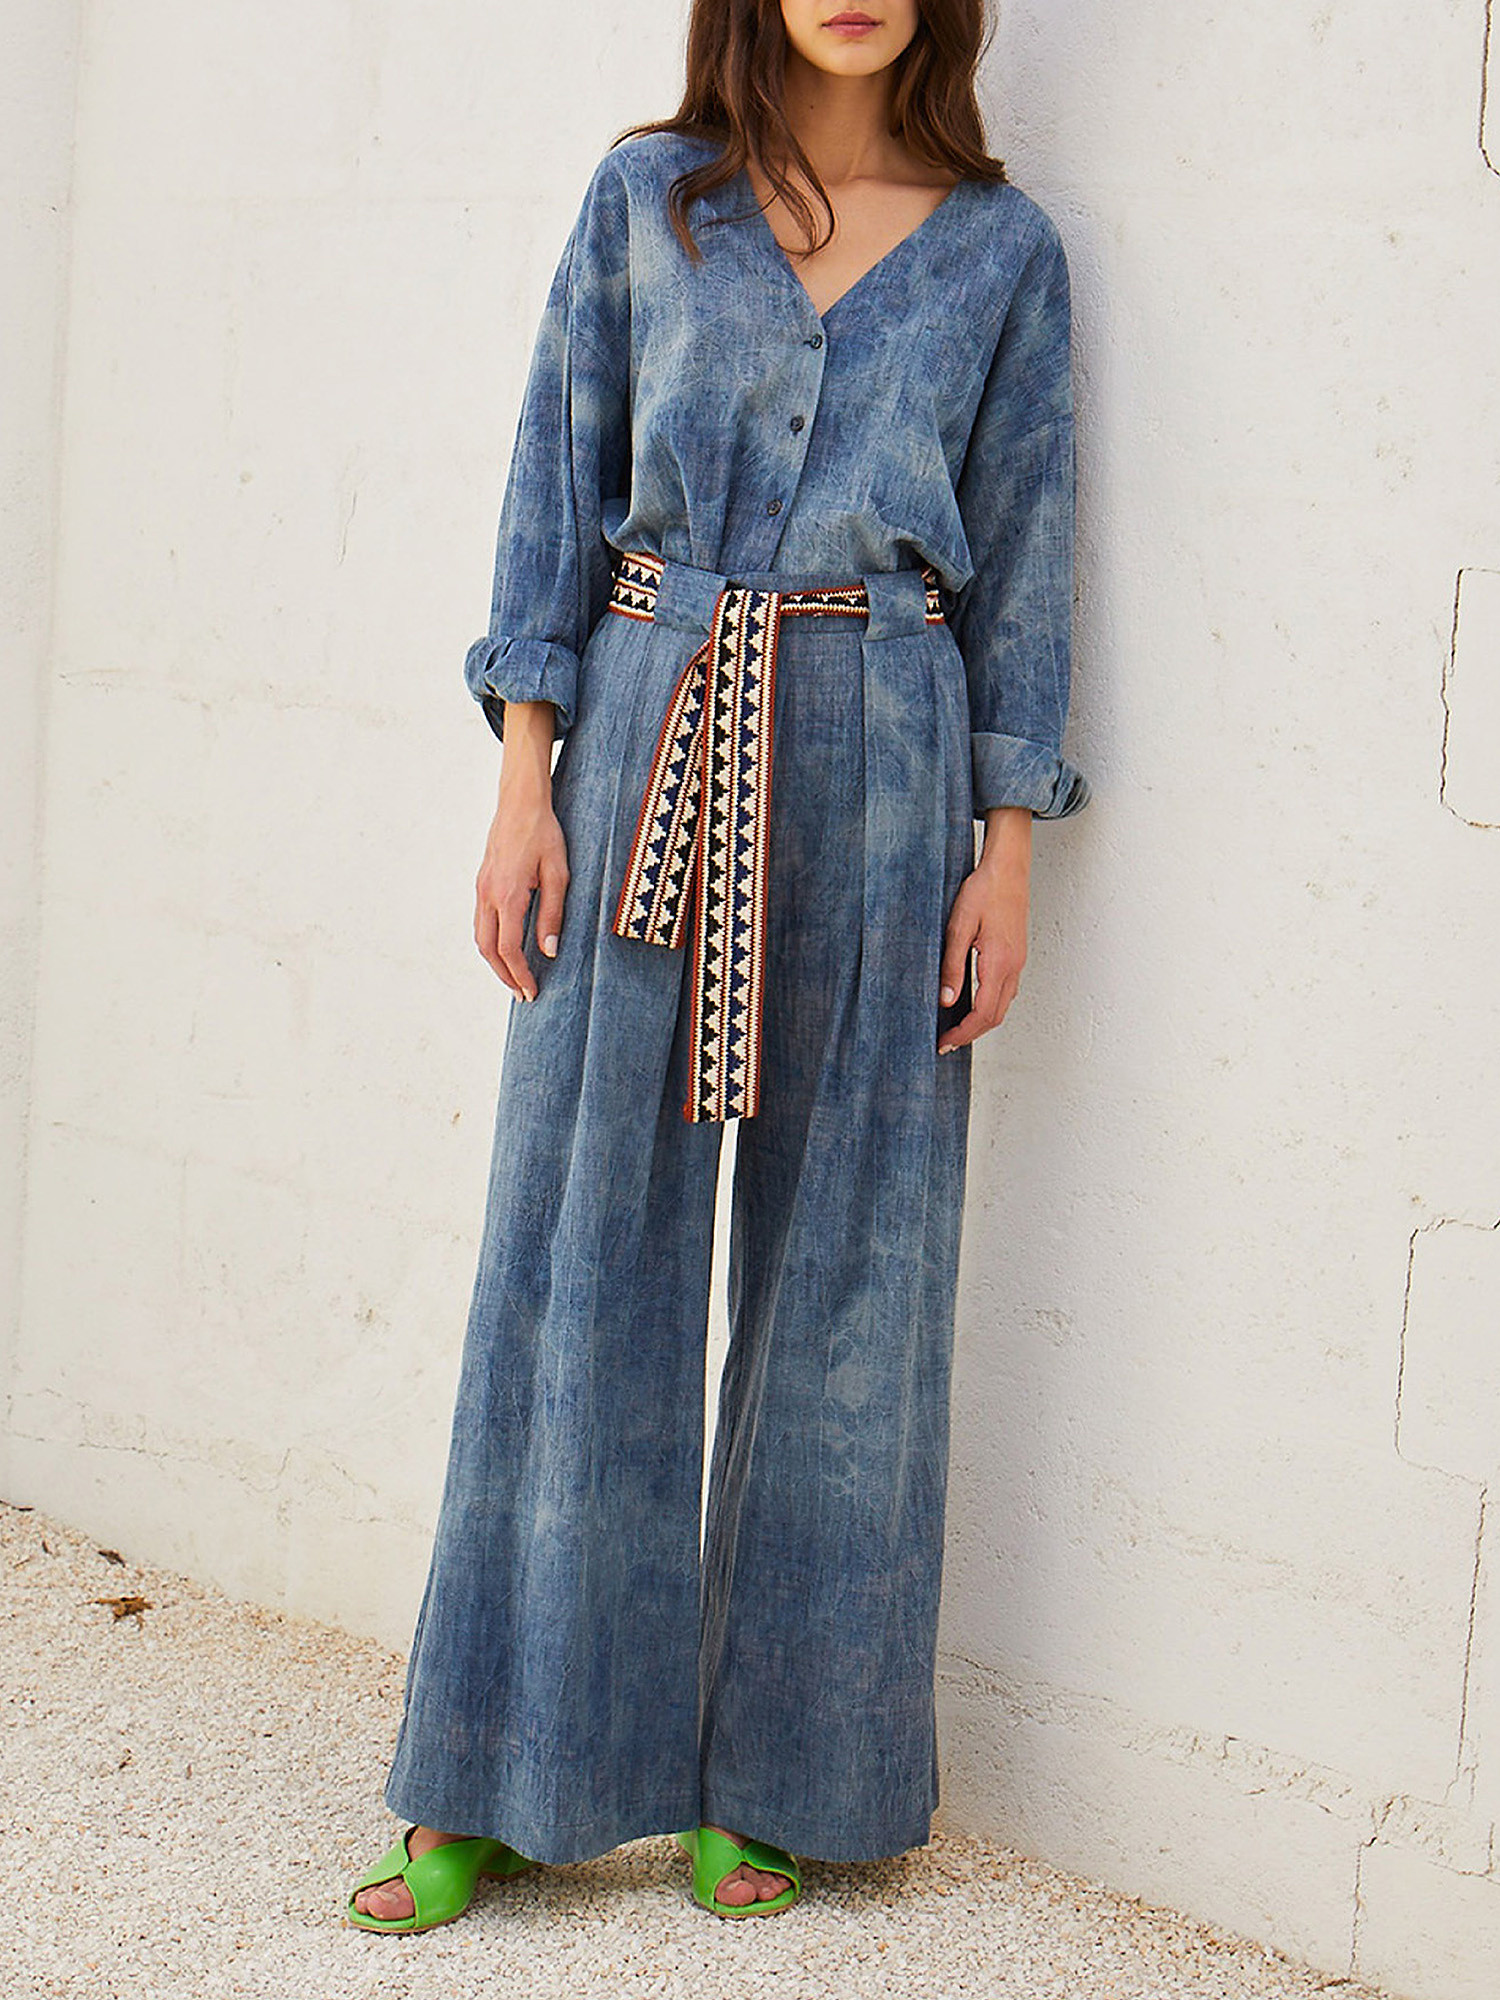 Momonì - Leona pants in tie dyed chambray, Denim, large image number 1